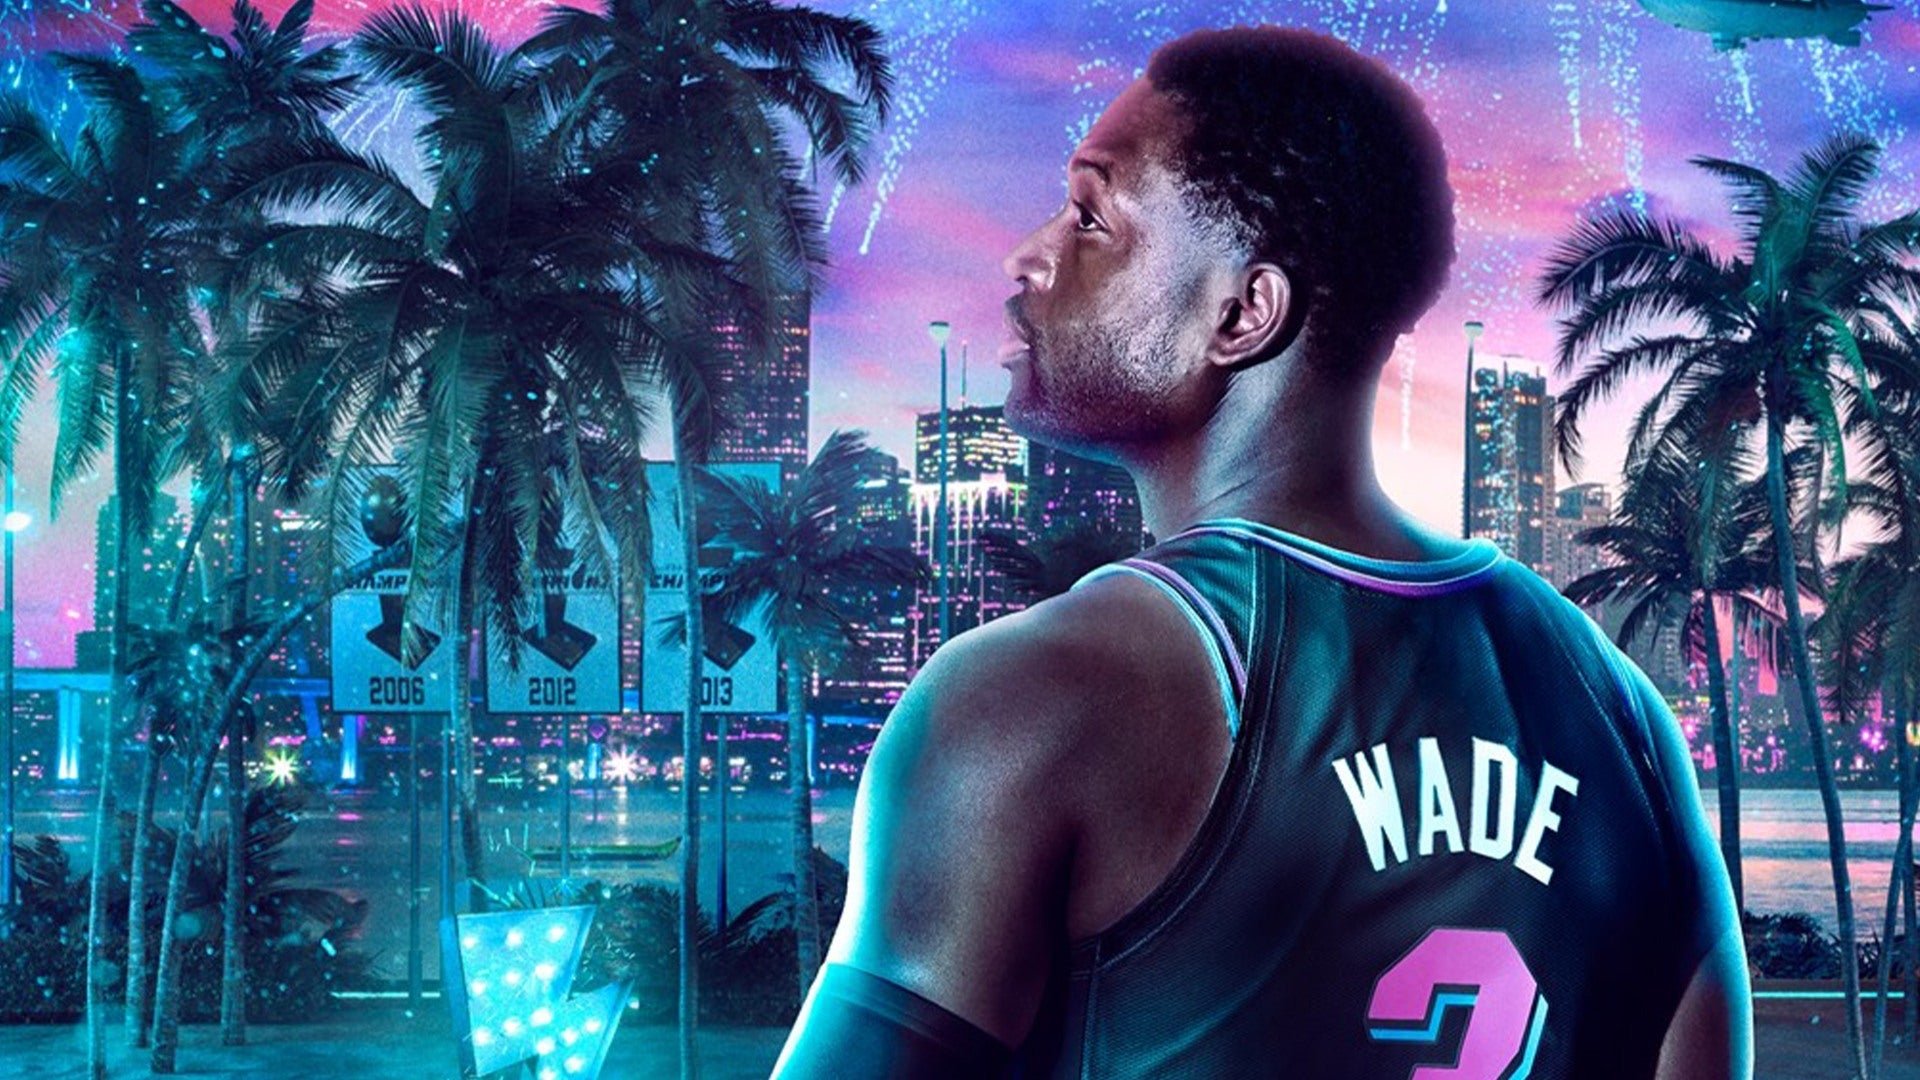 NBA 2K21: Release date, cover athlete, and news — What you need to know